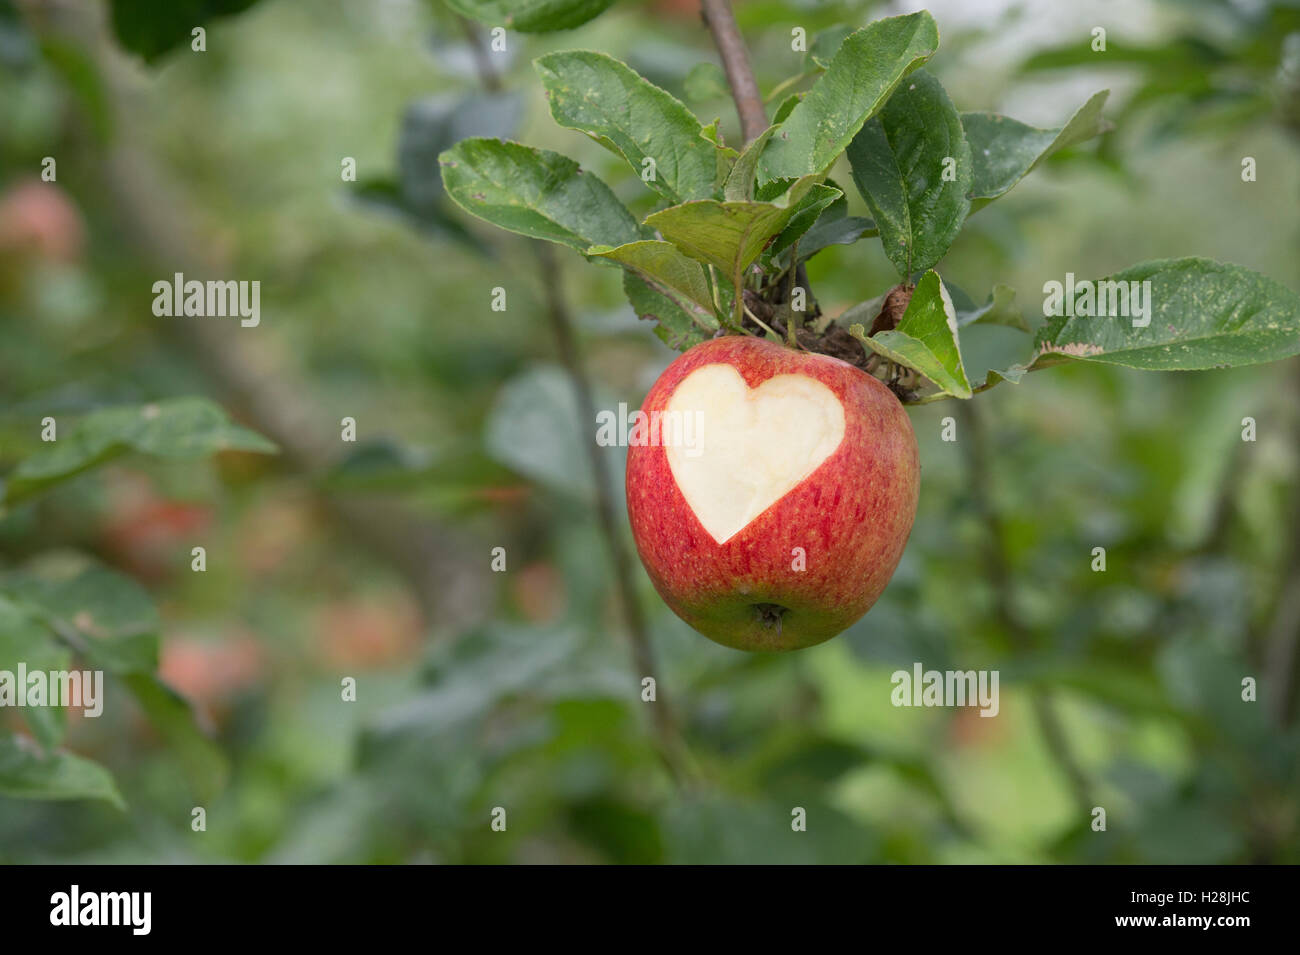 Malus domestica. Heart shape cut into Apple 'Charles ross' on the tree Stock Photo